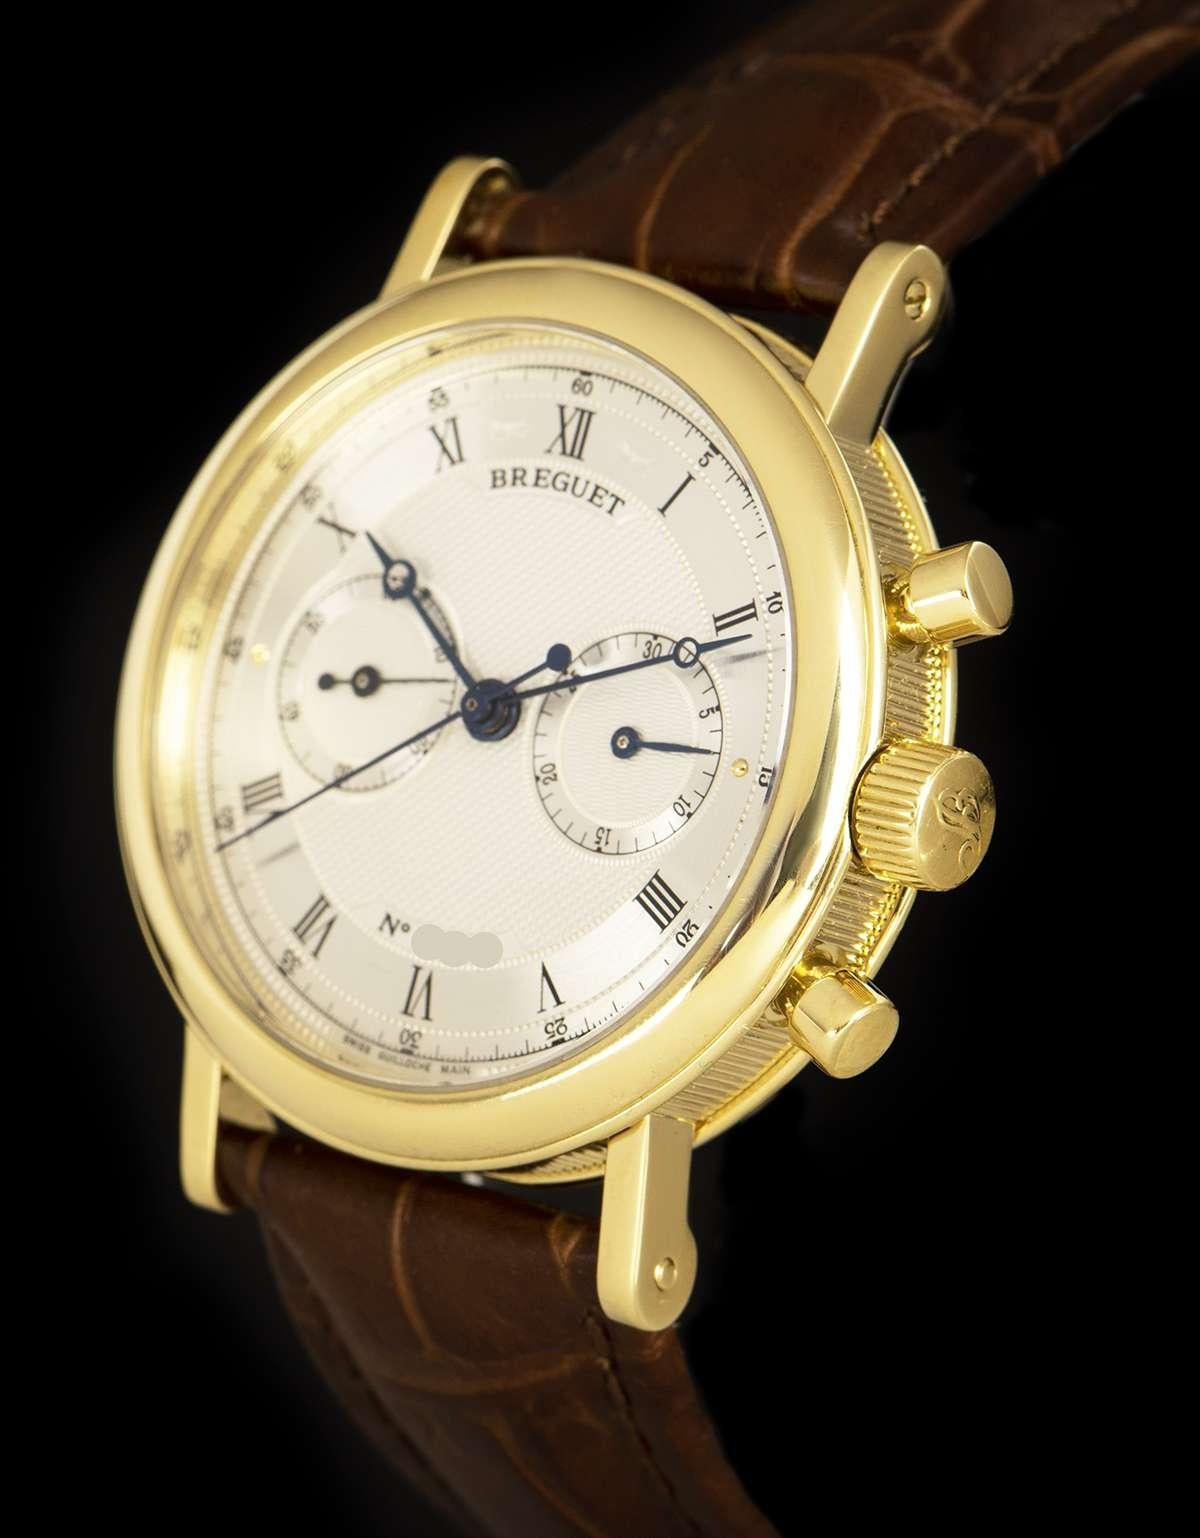 An 18k Yellow Gold Classique Gents 37mm Wristwatch, silvered guilloche dial hand engraved on a rose engine with roman numerals, 30 minute recorder at 3 0'clock, small seconds at 9 0'clock, a fixed 18k yellow gold bezel, a brown leather strap (not by